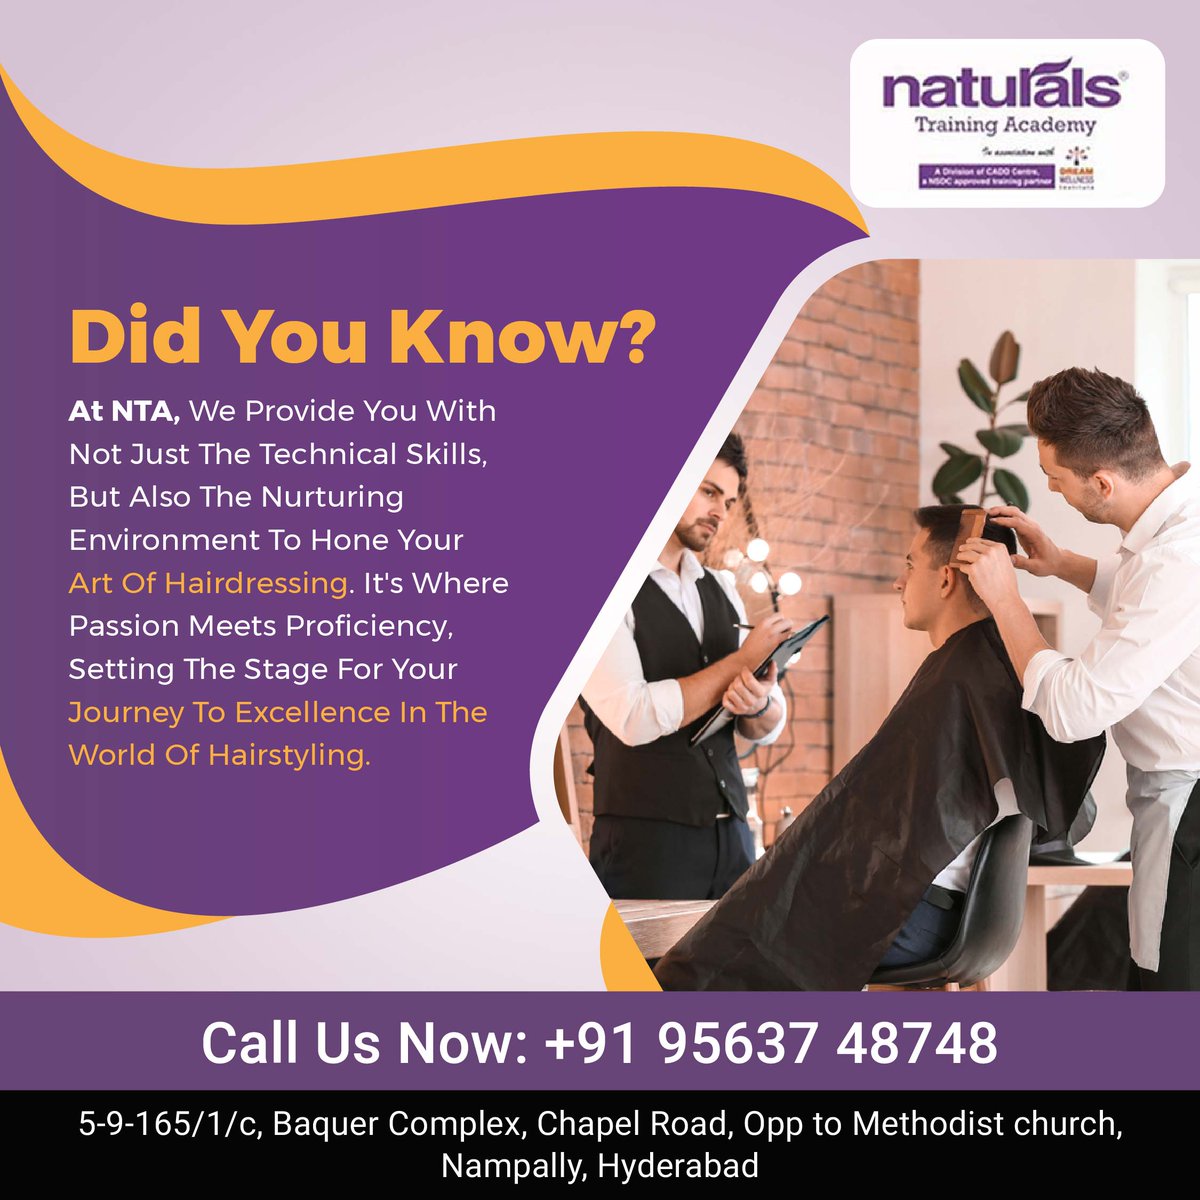 NTA offers a nurturing environment for honed hairdressing skills, blending passion and proficiency. Contact Us: 95637 48748 visit : naturalsacademy.com #haircarejourney #beginnerhairdresser #naturalstrainingacademy #nta #nampally #hyderabad